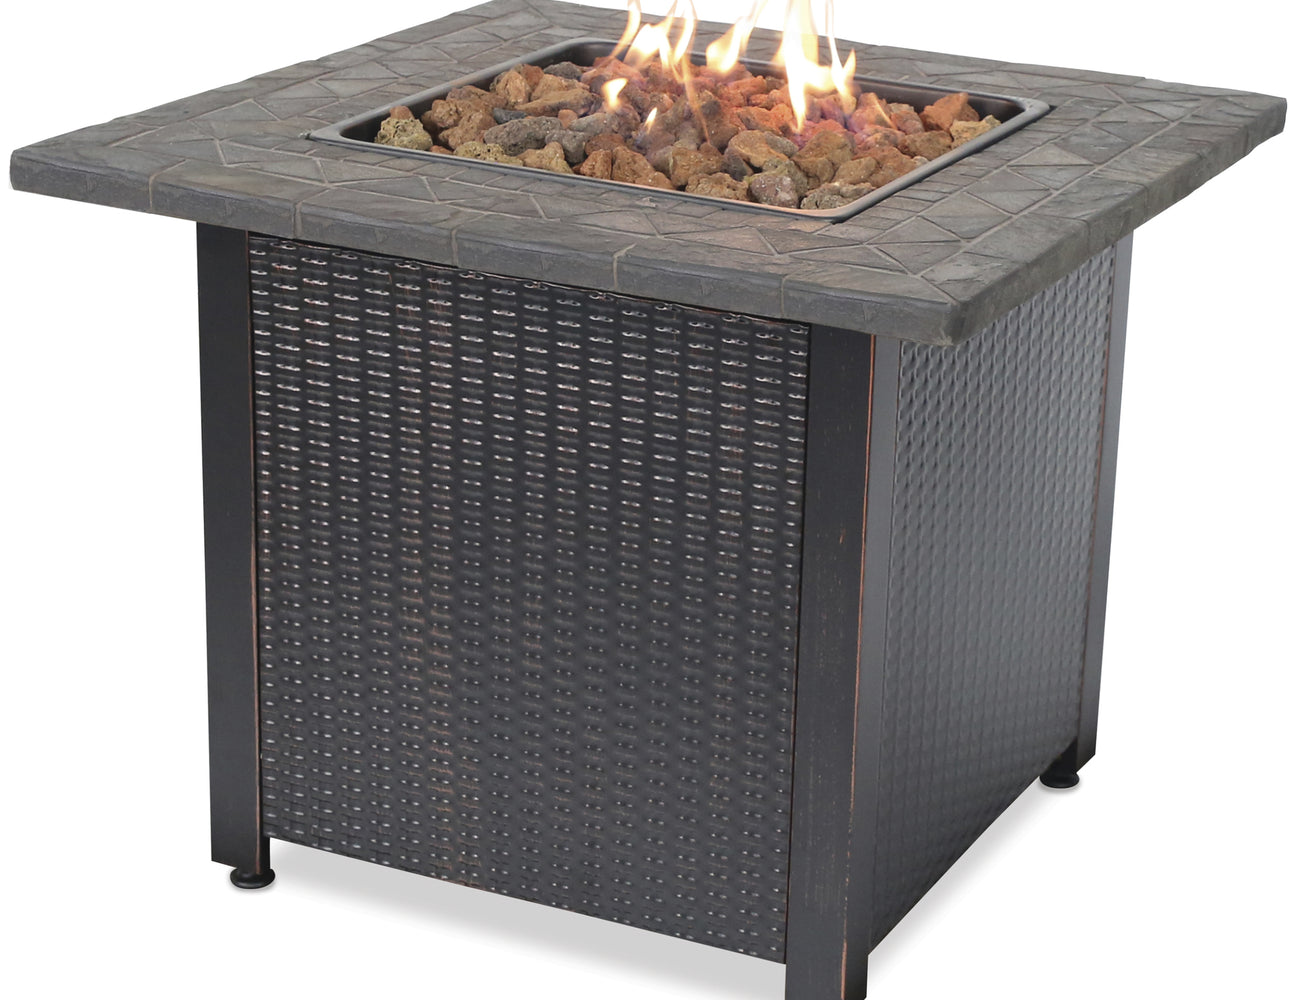 LP Outdoor Firebowl with Resin Mantel